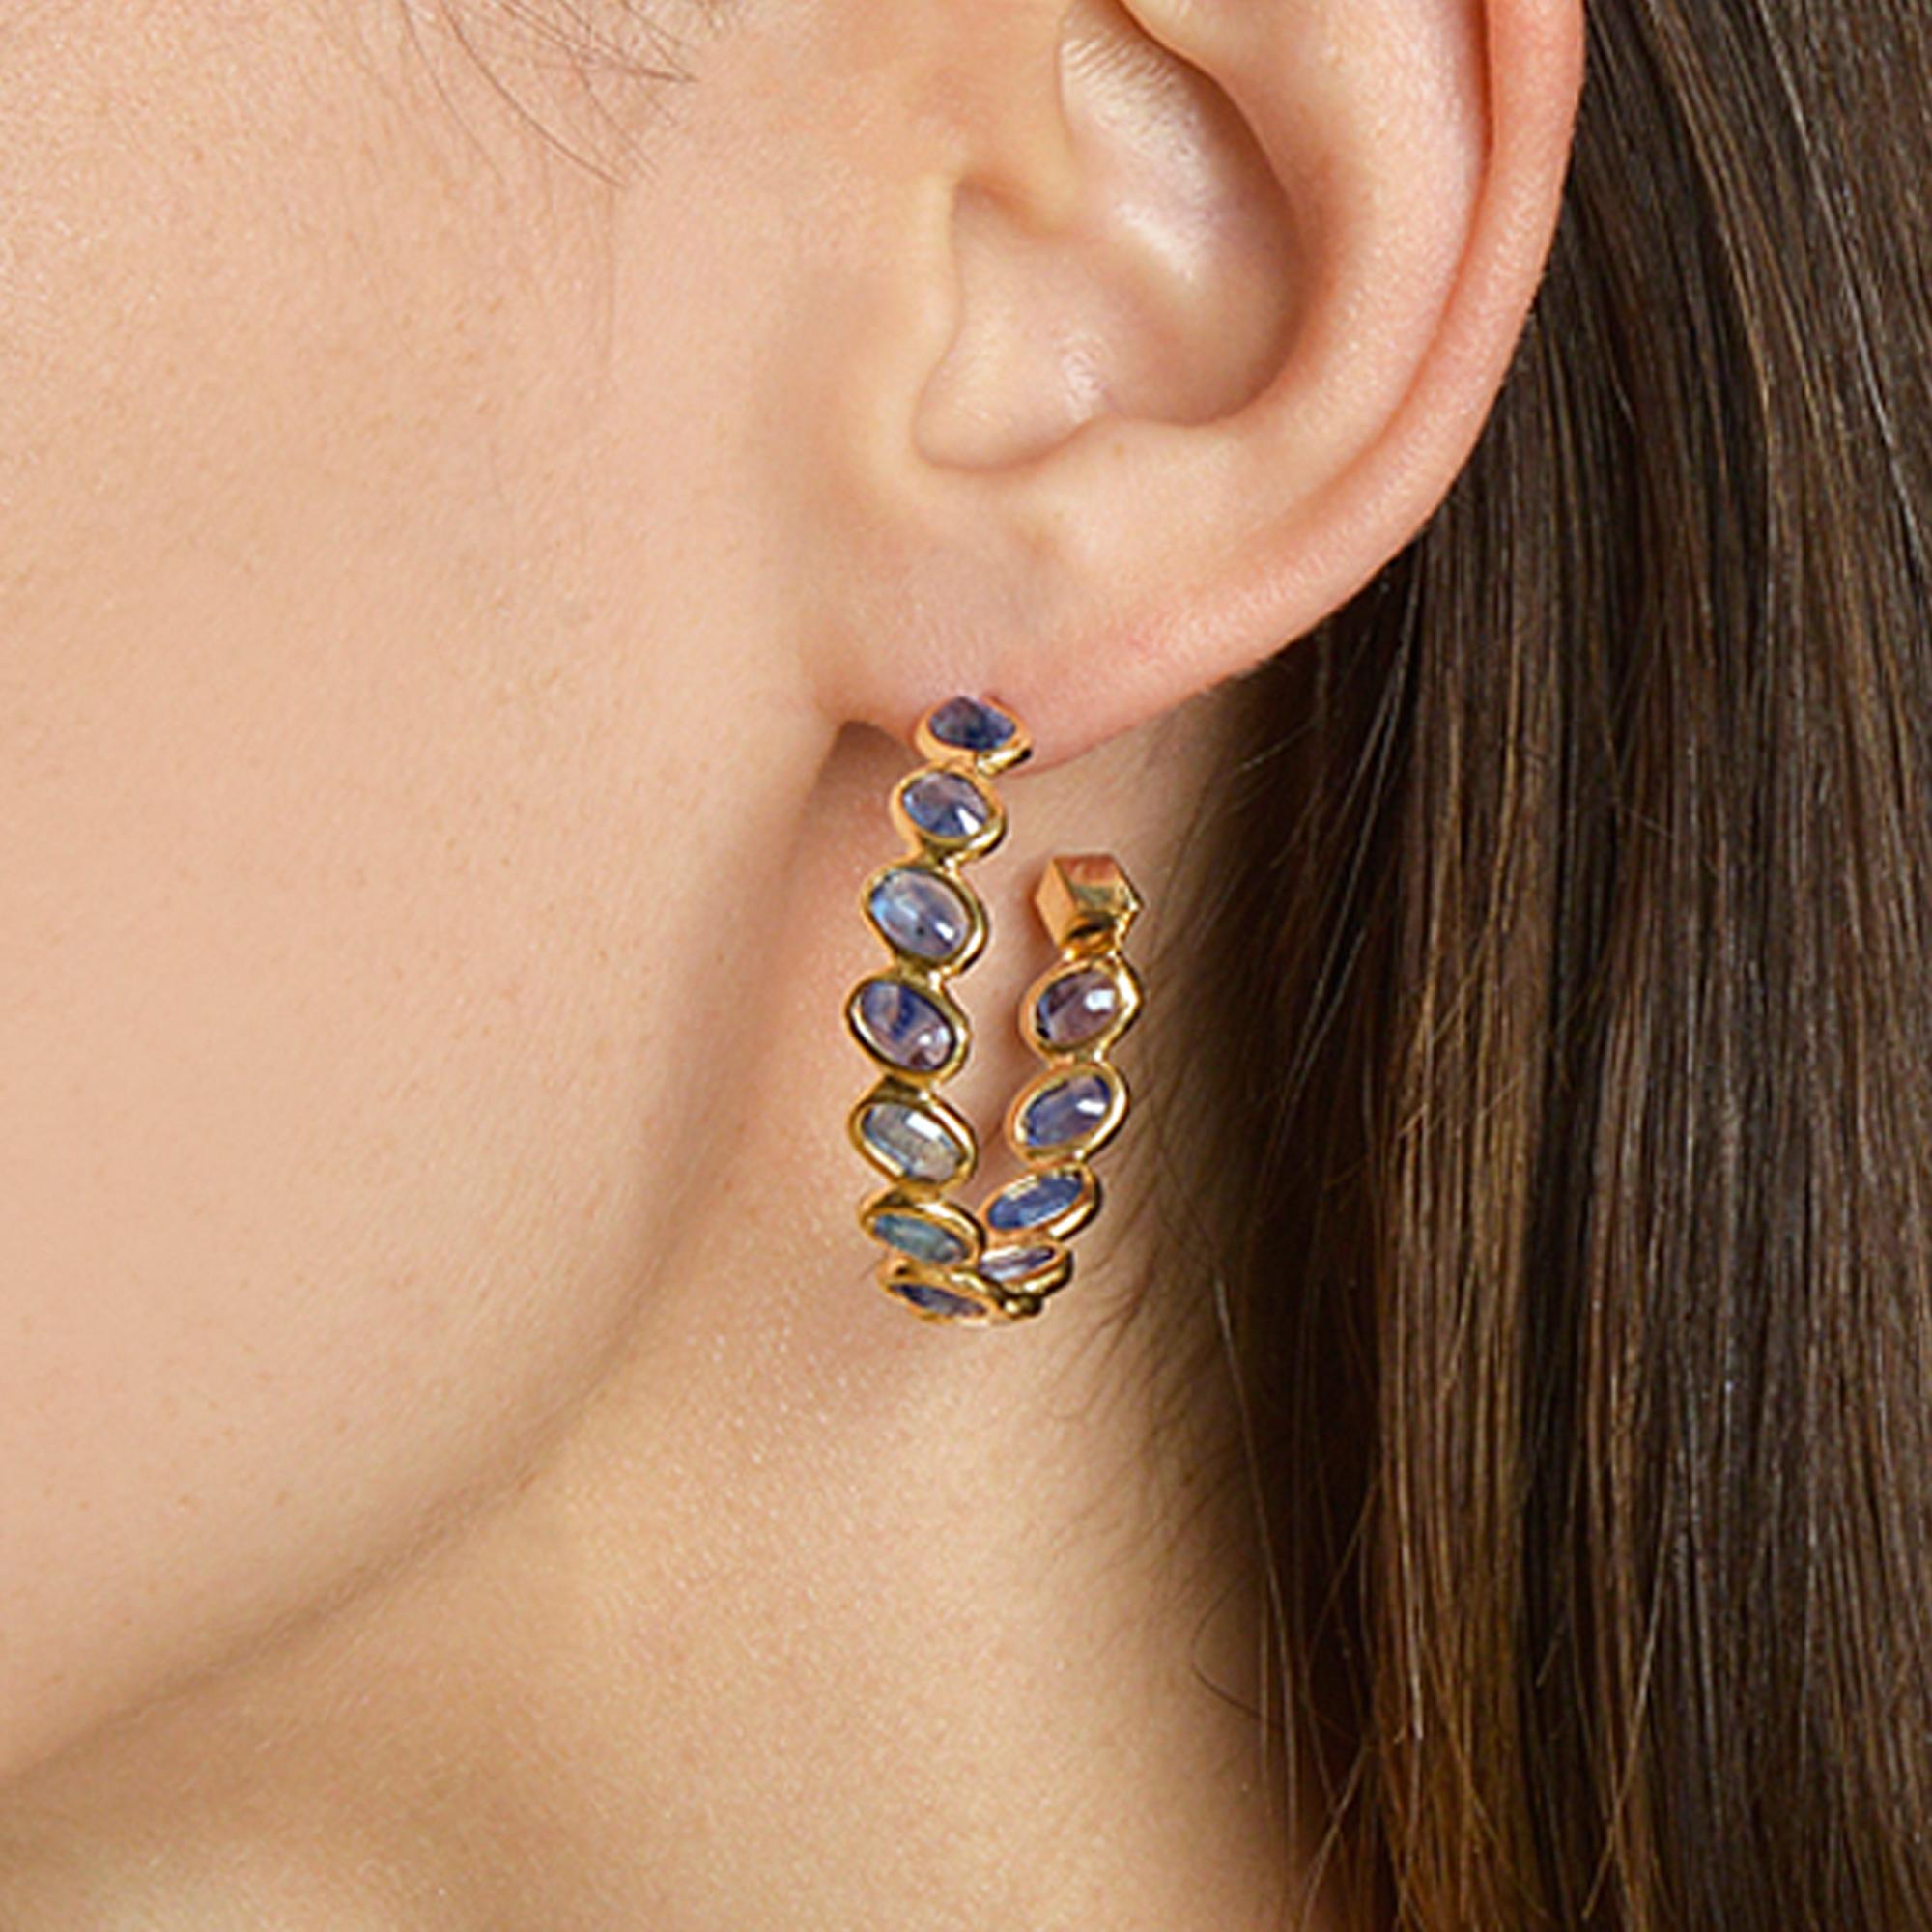 18kt yellow gold Ombré hoop earrings with bezel set multishade oval blue sapphires at 11 o'clock® and signature Brillante® motif, medium.

Reimagined from summers spent at the Tuscan shore, the Ombré collection highlights the diverse hues and